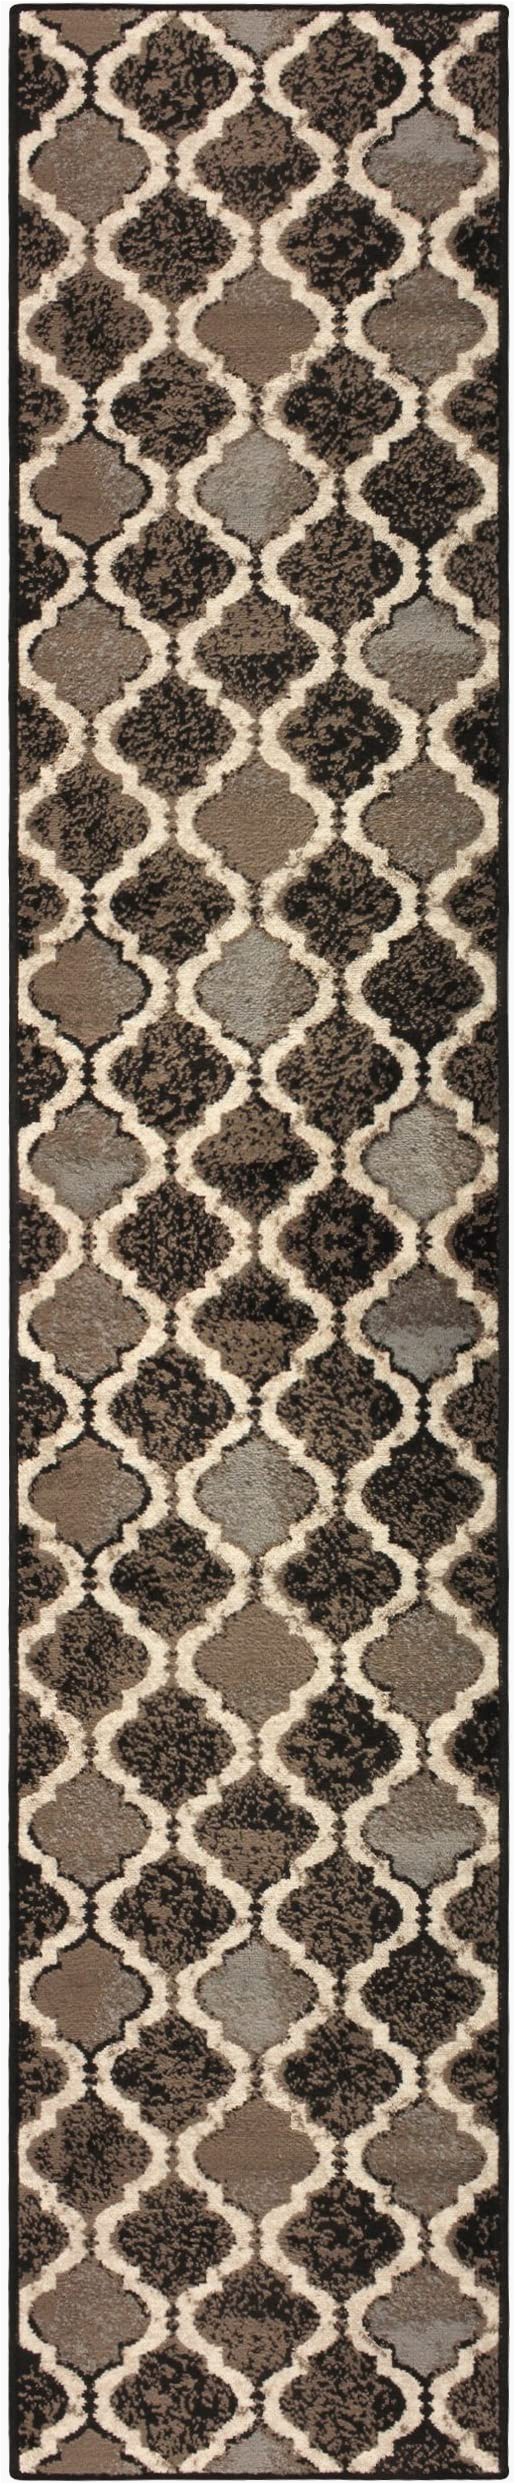 Area Rugs with soft Backing Superior Gudrun Indoor area Rug Super soft Durable Elegant Geometric Trellis Pattern Mid Century Contemporary Jute Backing Chocolate 2 X